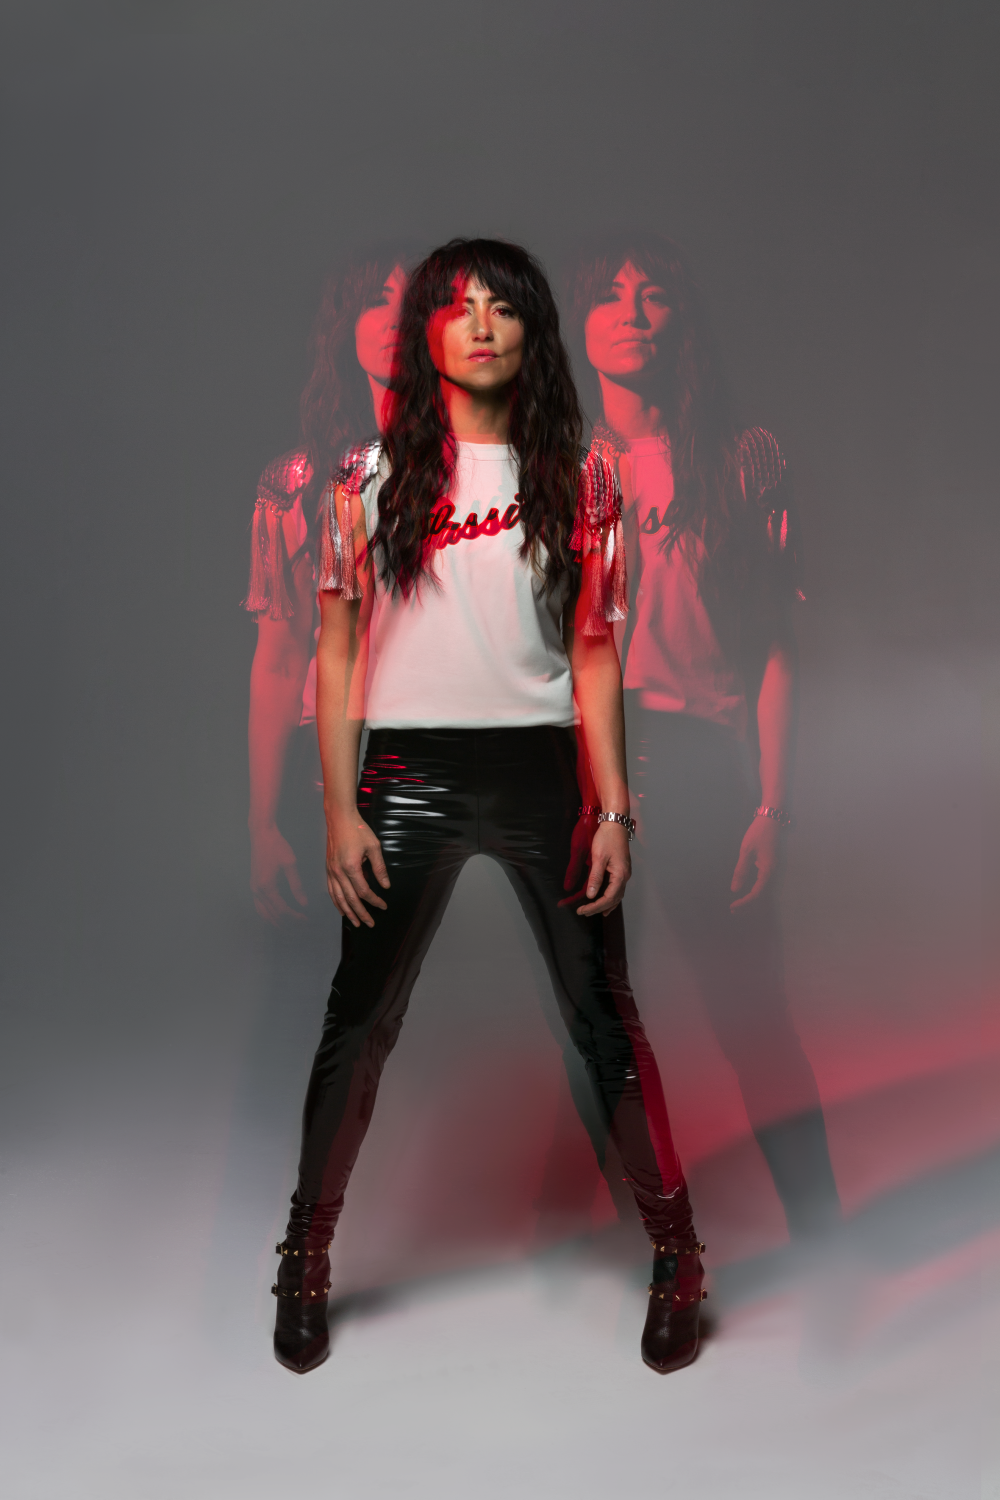 Popstar KT Tunstall in a wide-legged pose.